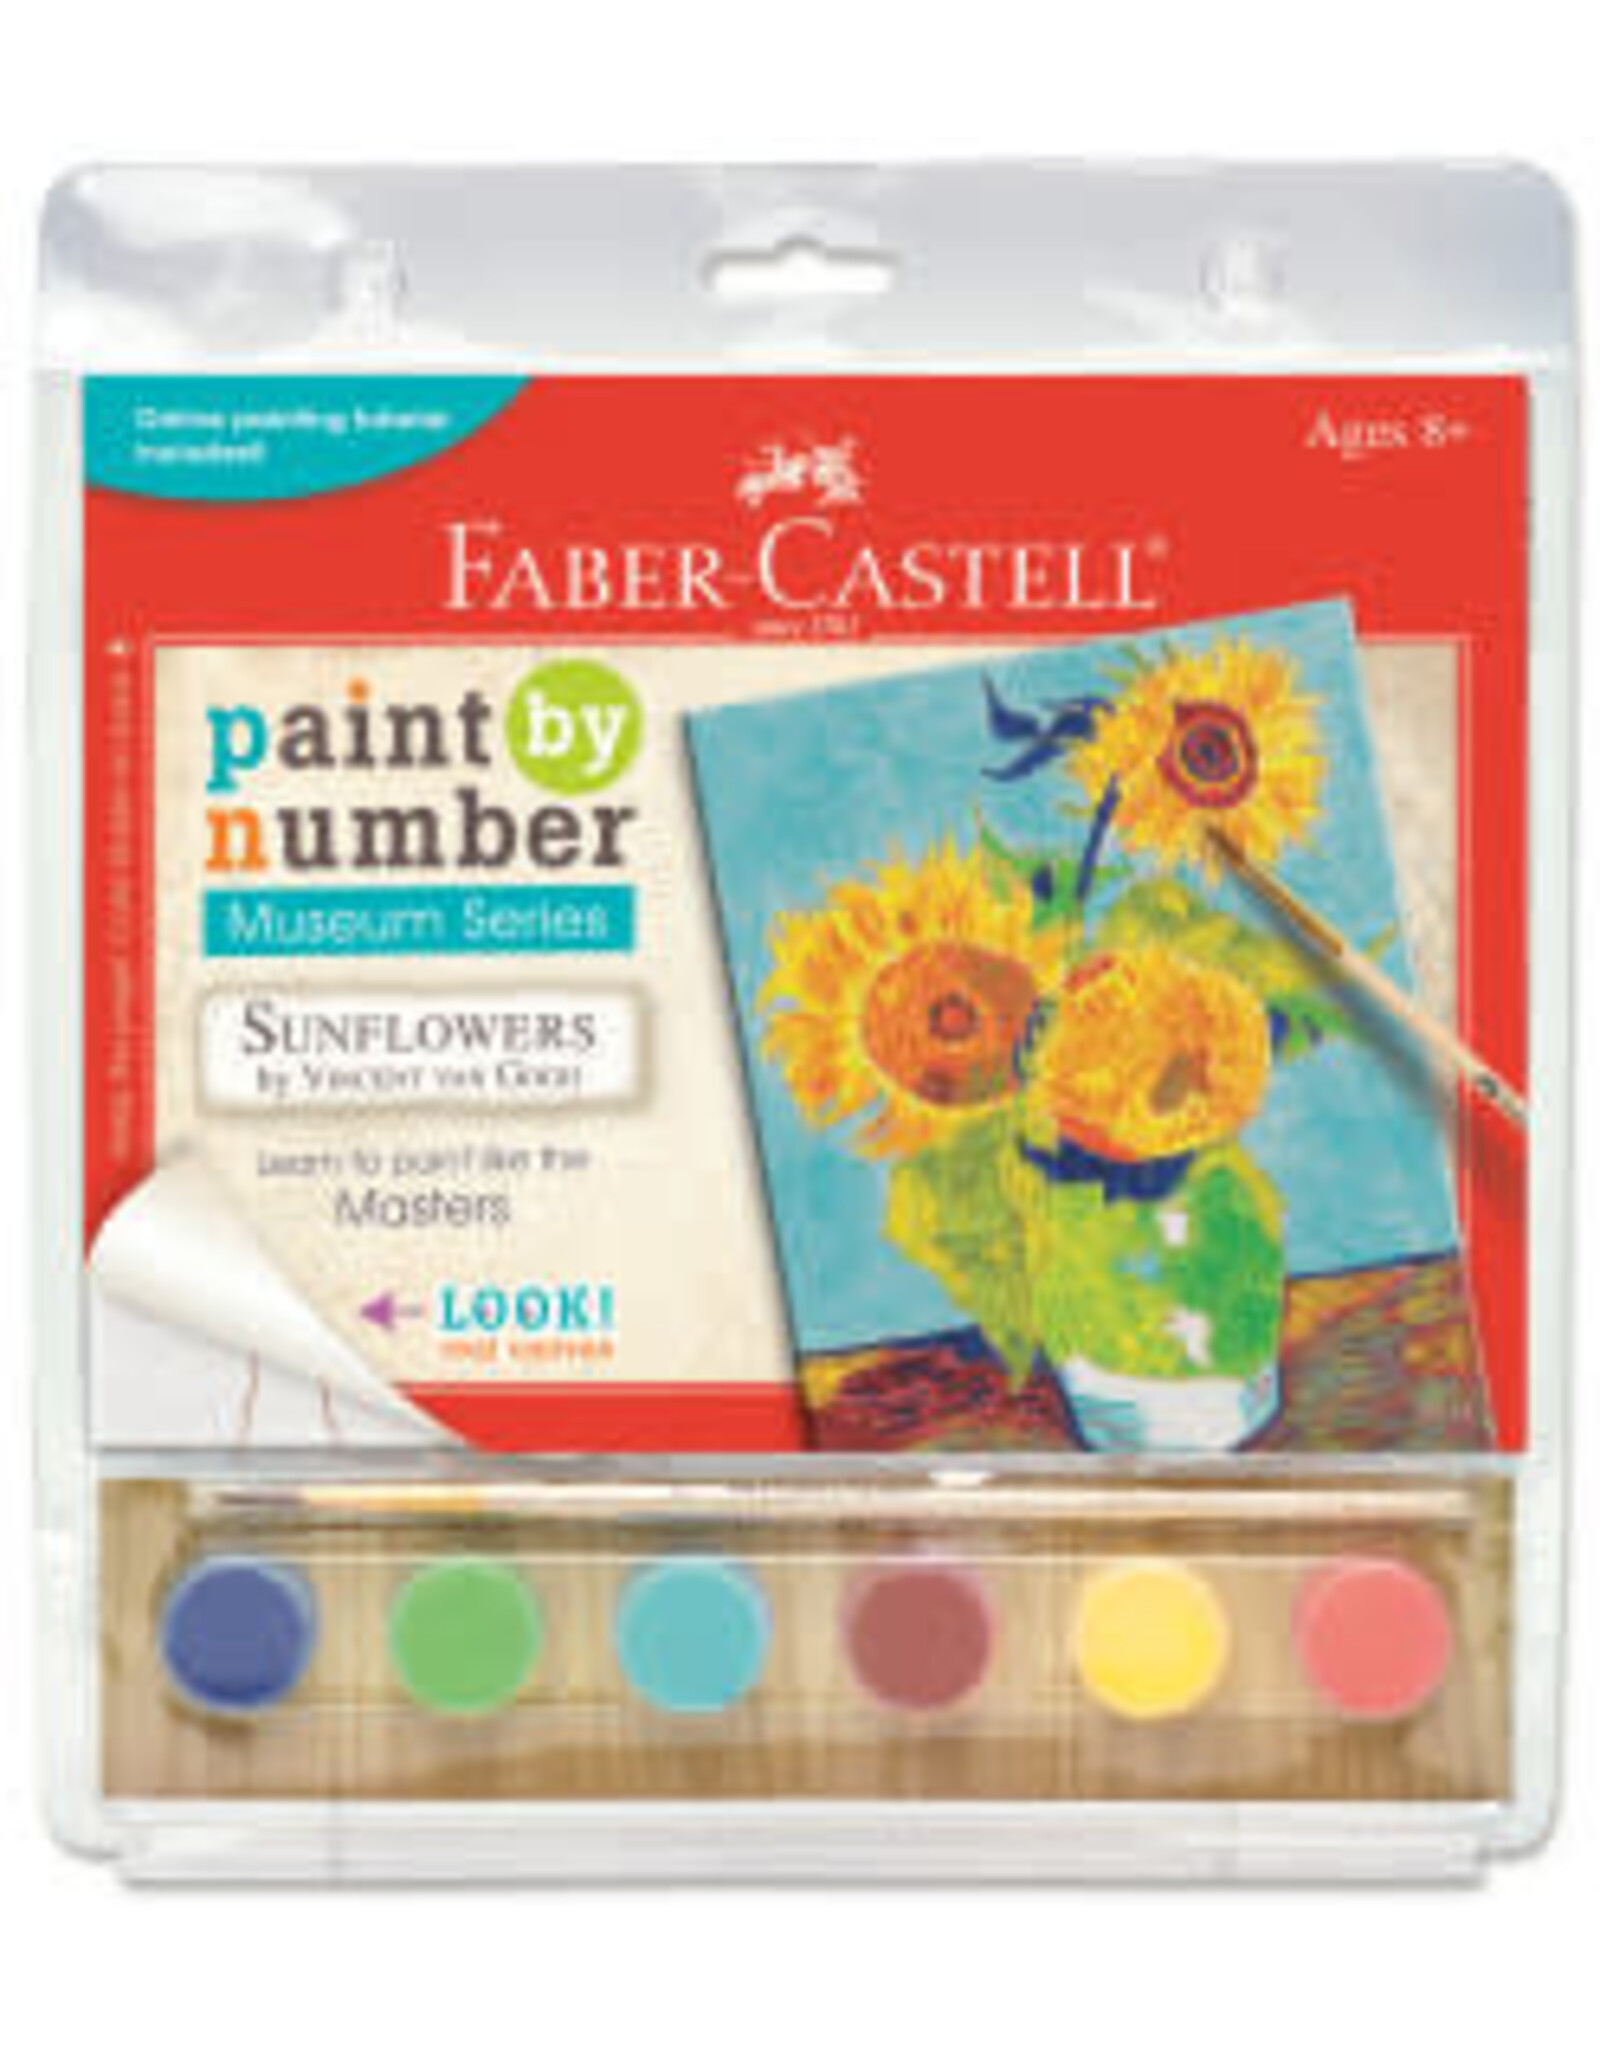 Faber-Castell Paint By Number Museum Series-Sunflowers